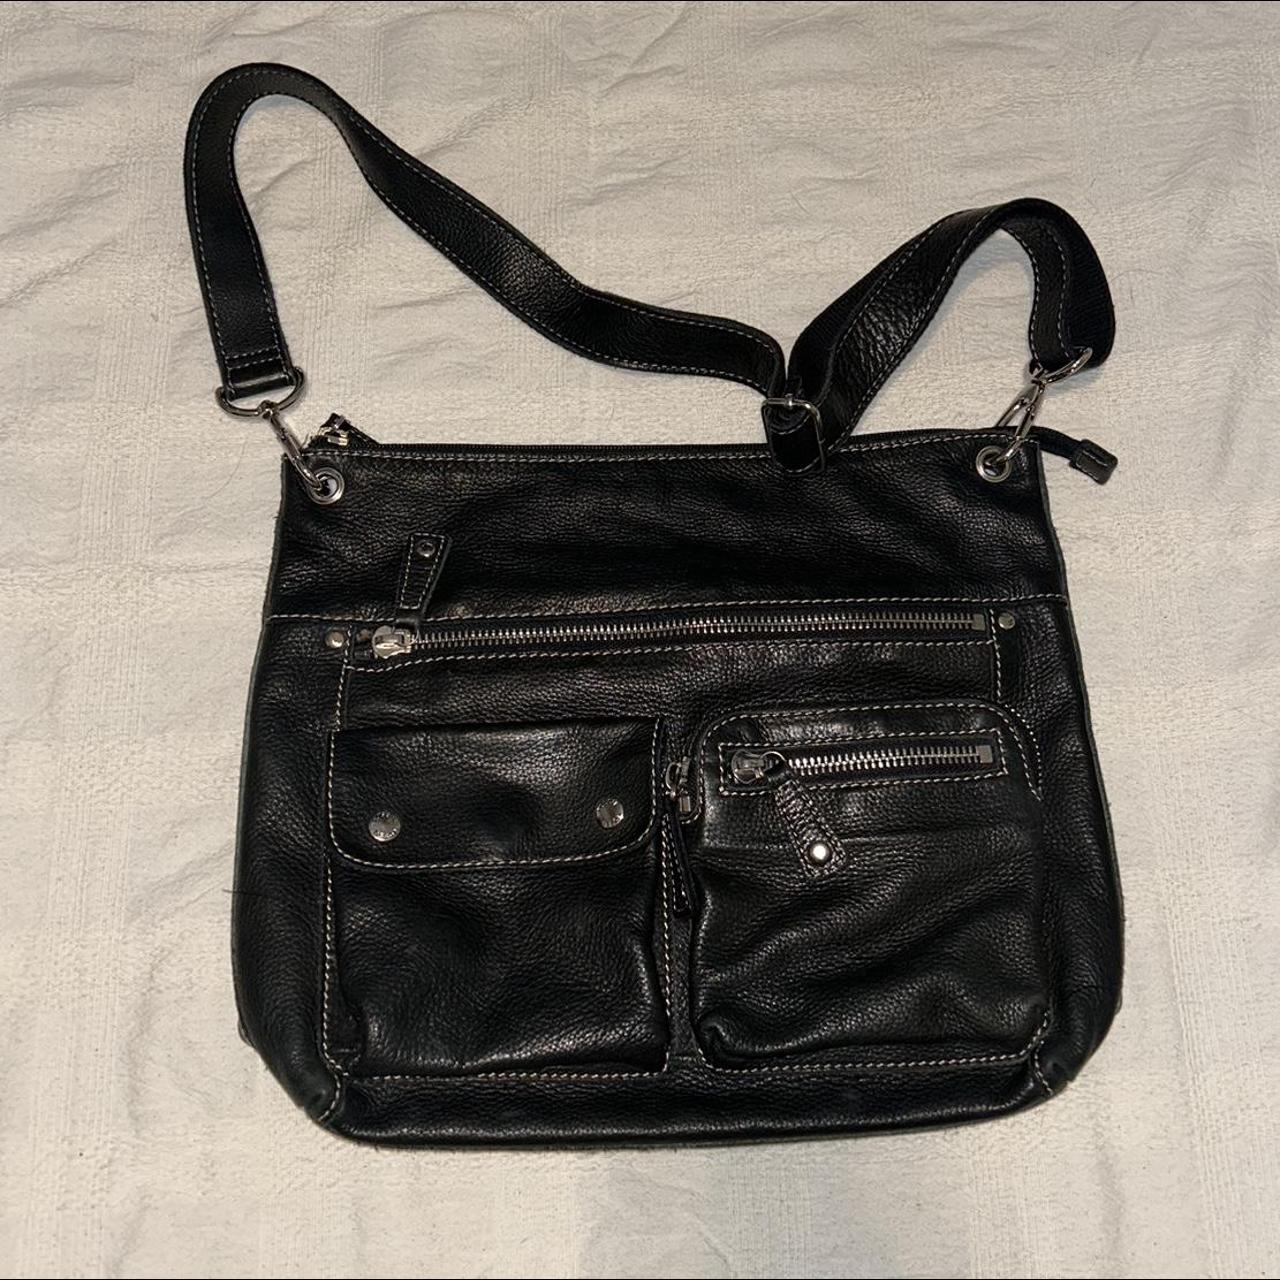 Fossil Women's Black and Silver Bag